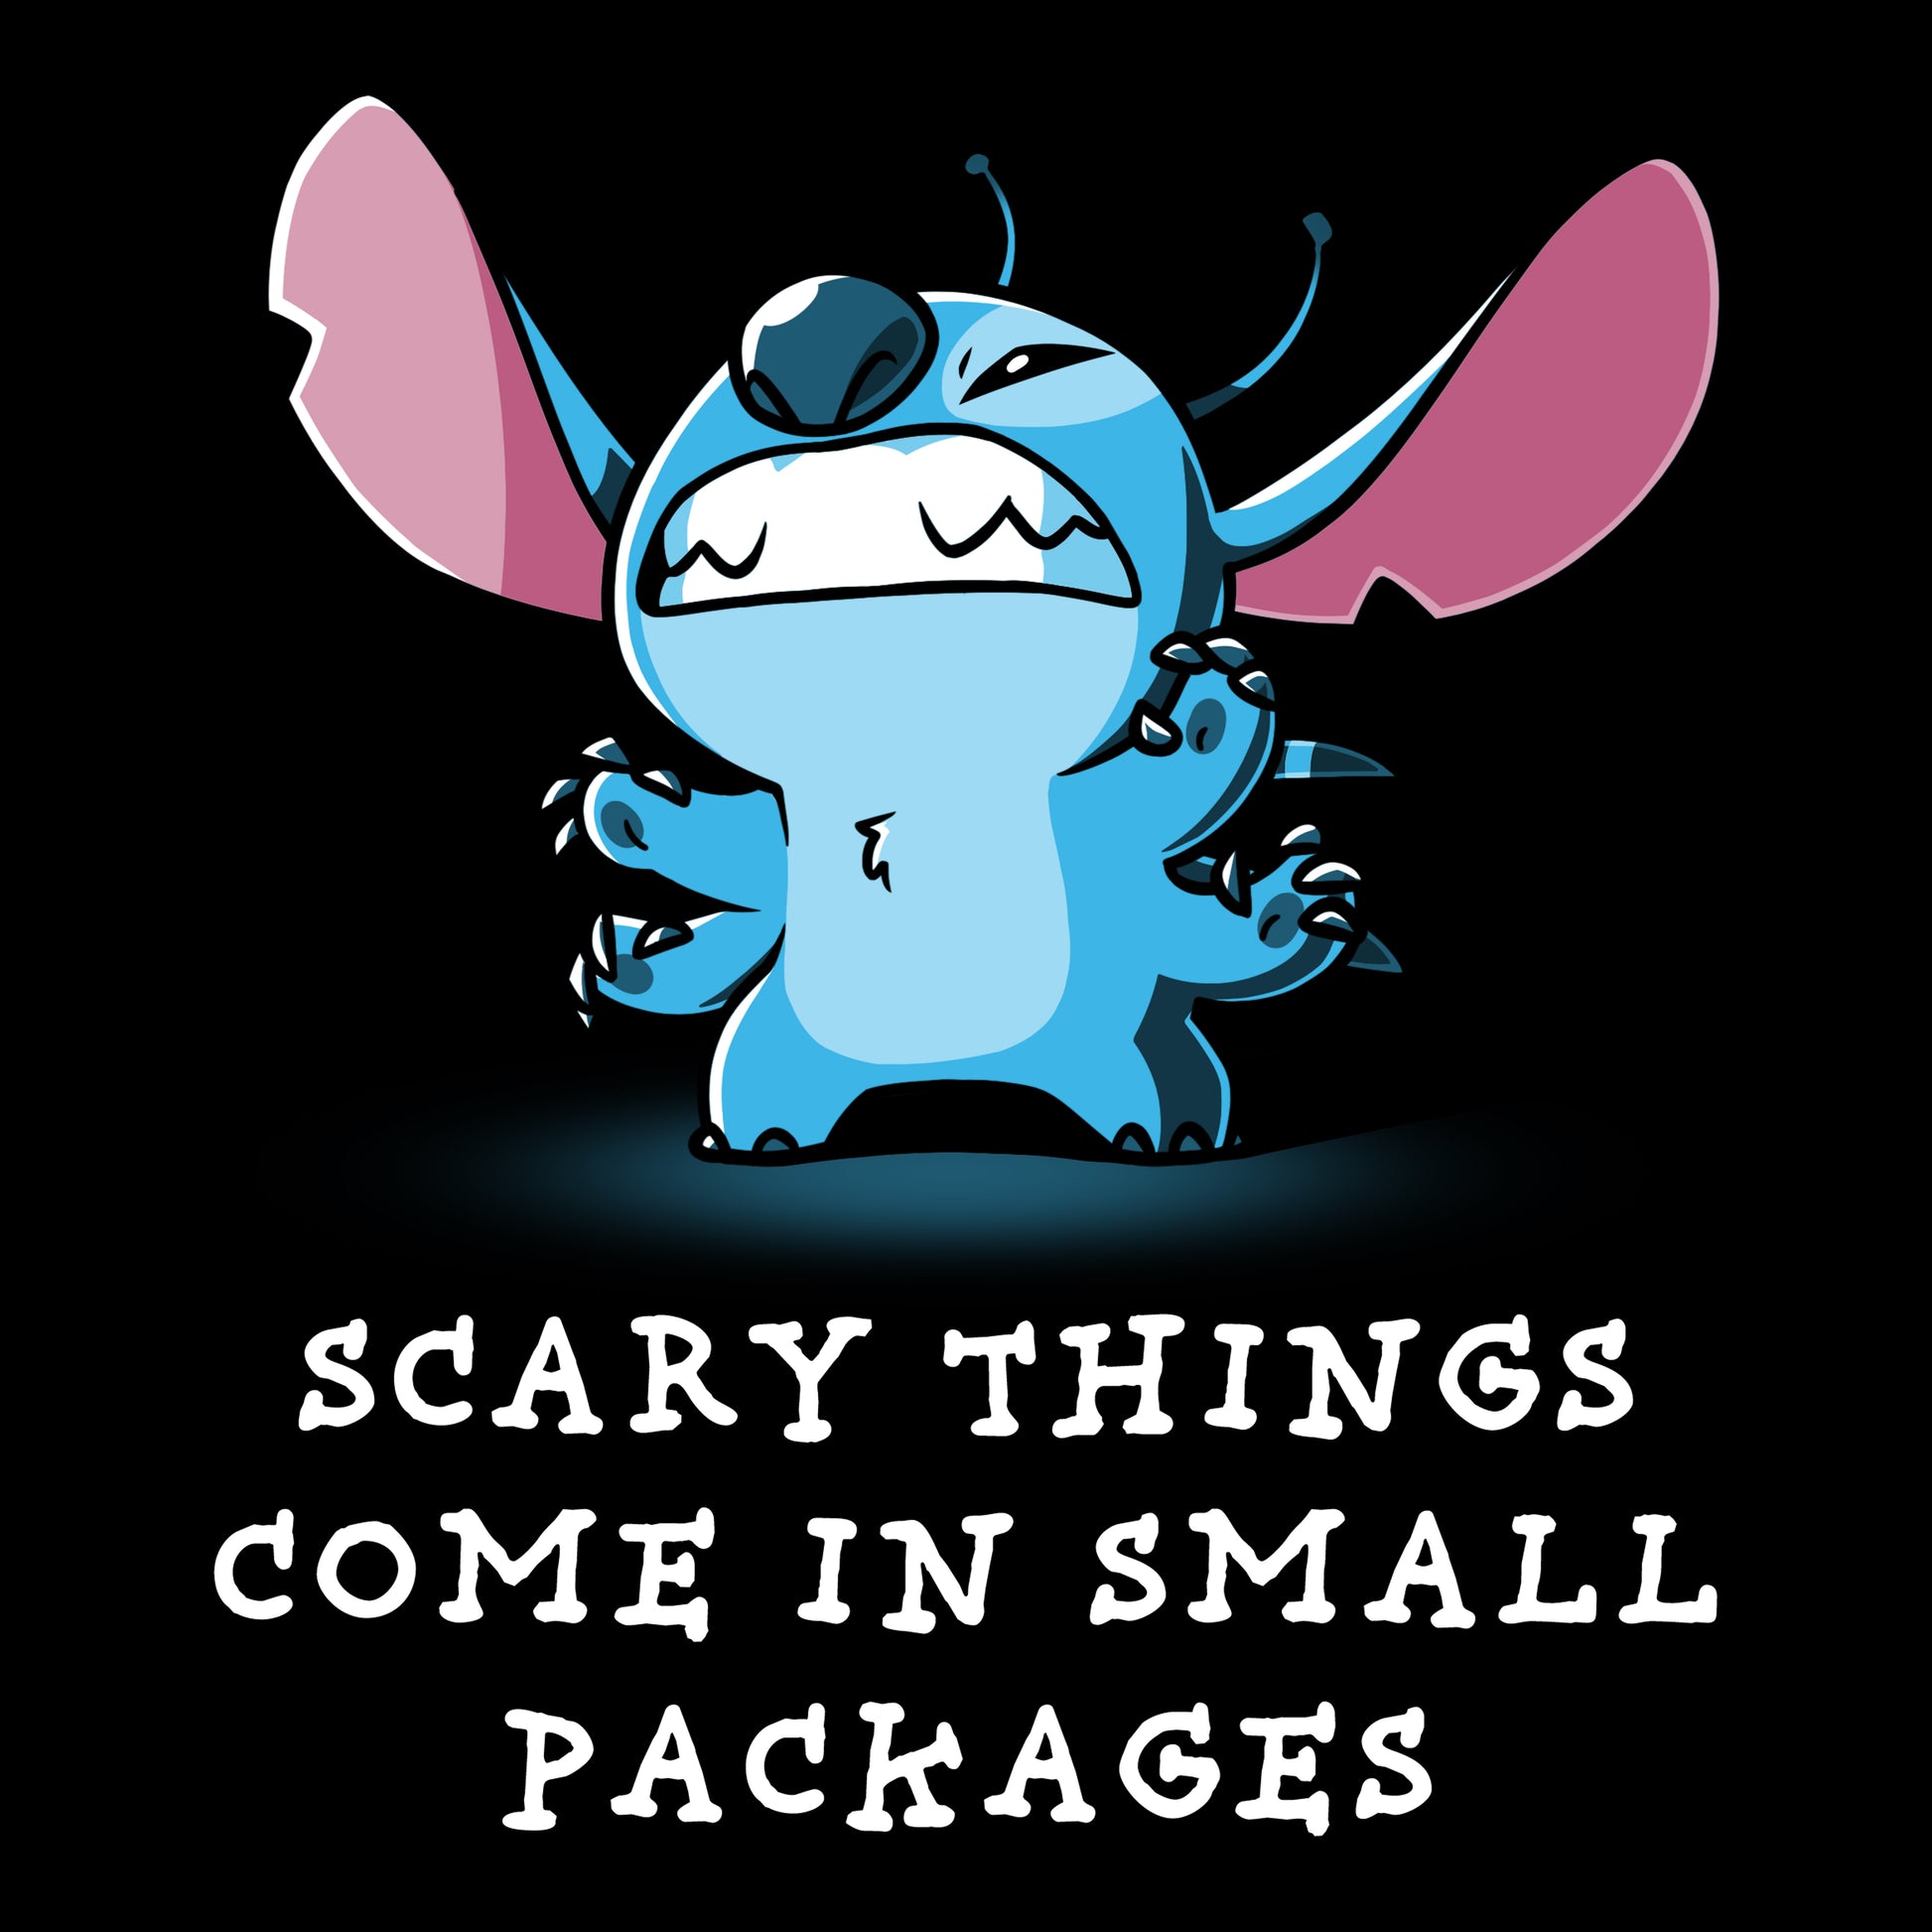 Stitch scares in a tiny Disney t-shirt called "Scary Things Come in Small Packages" by Disney.